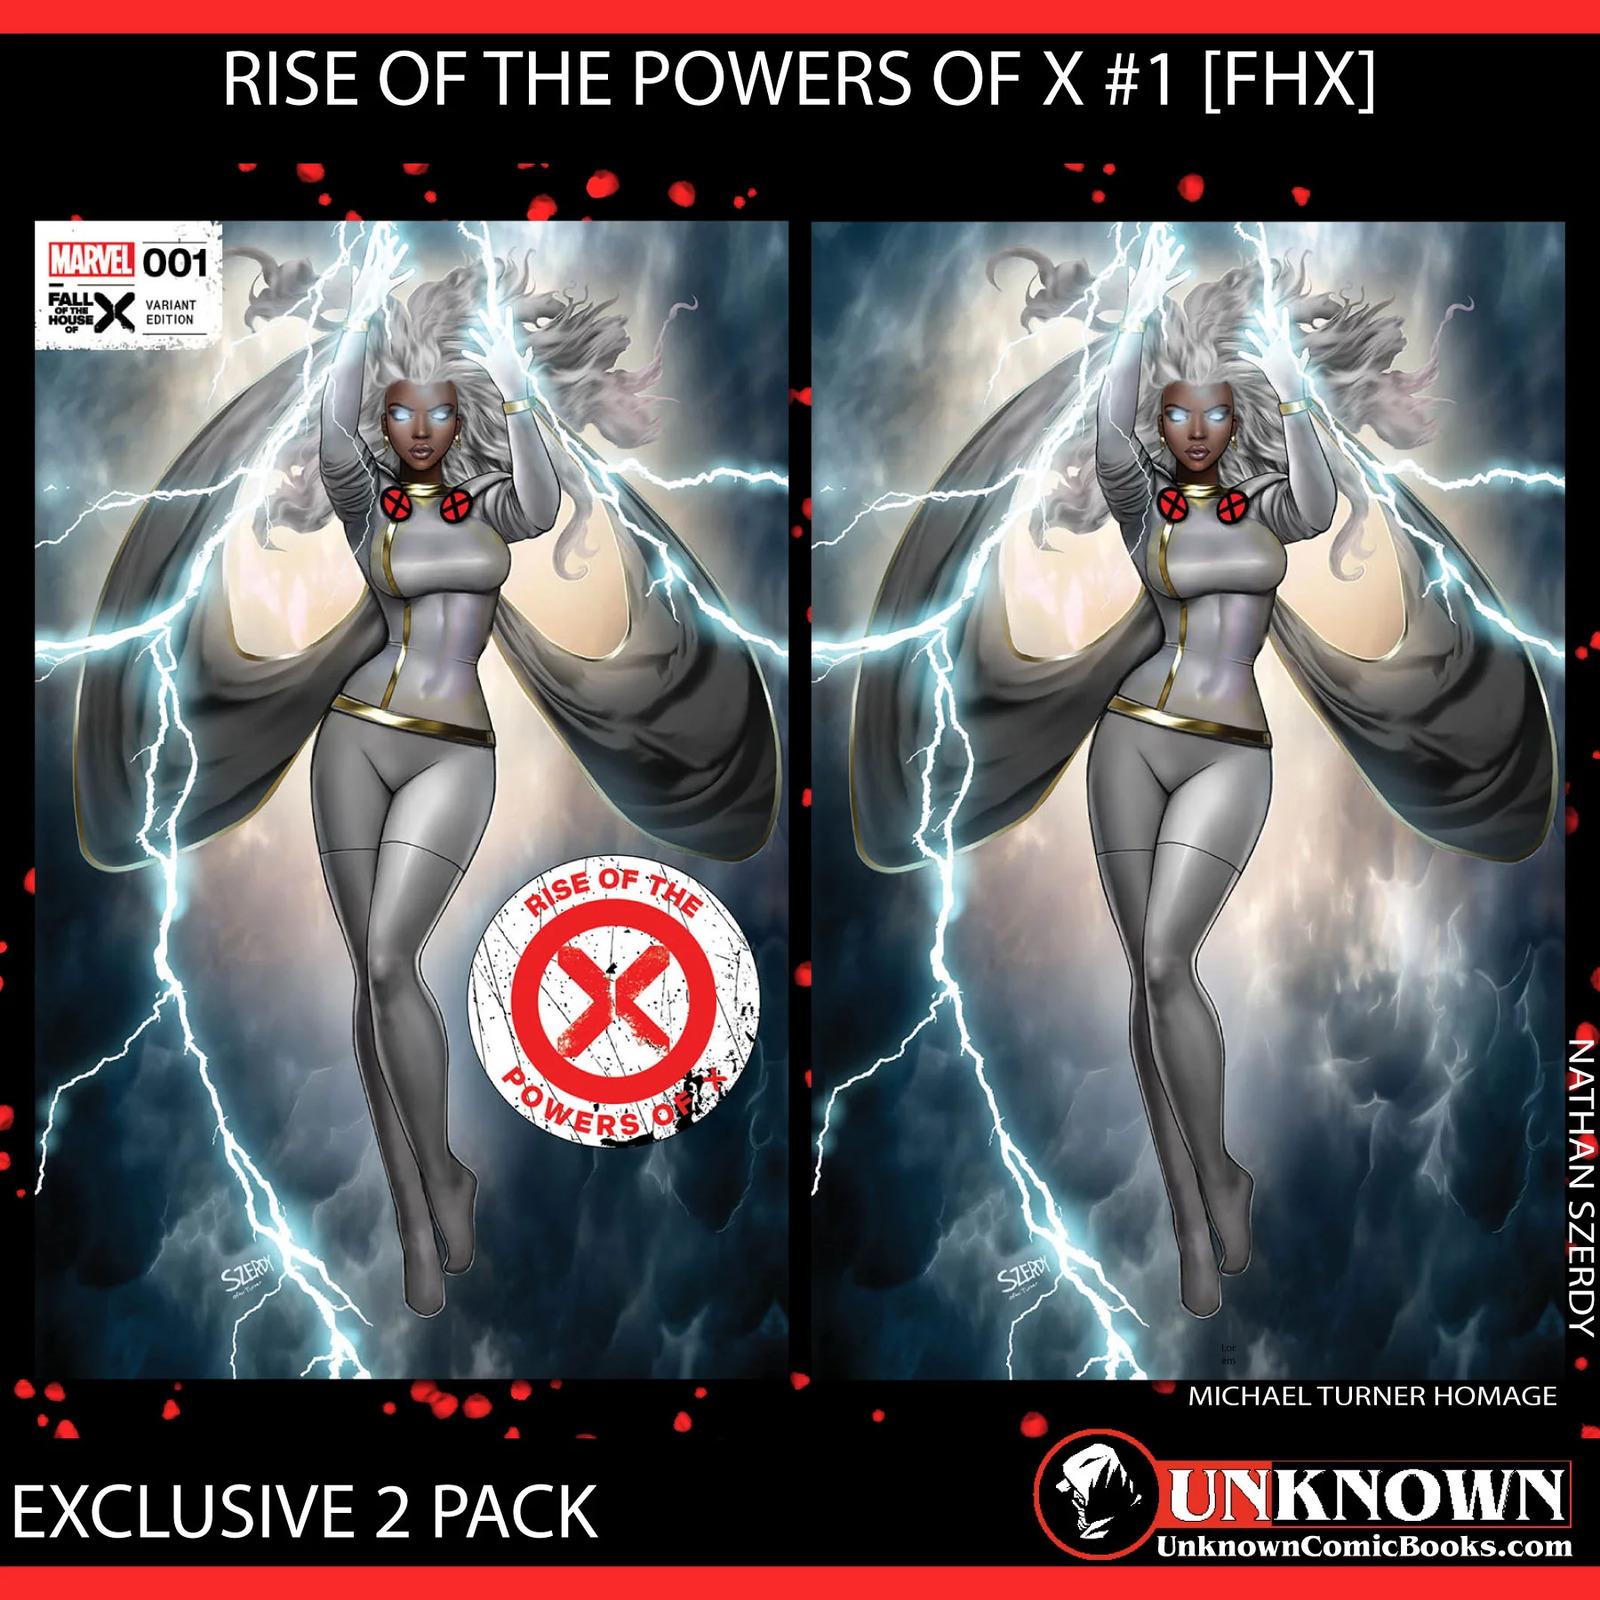 [2 PACK] RISE OF THE POWERS OF X #1 [FHX] UNKNOWN COMICS NATHAN SZERDY EXCLUSIVE